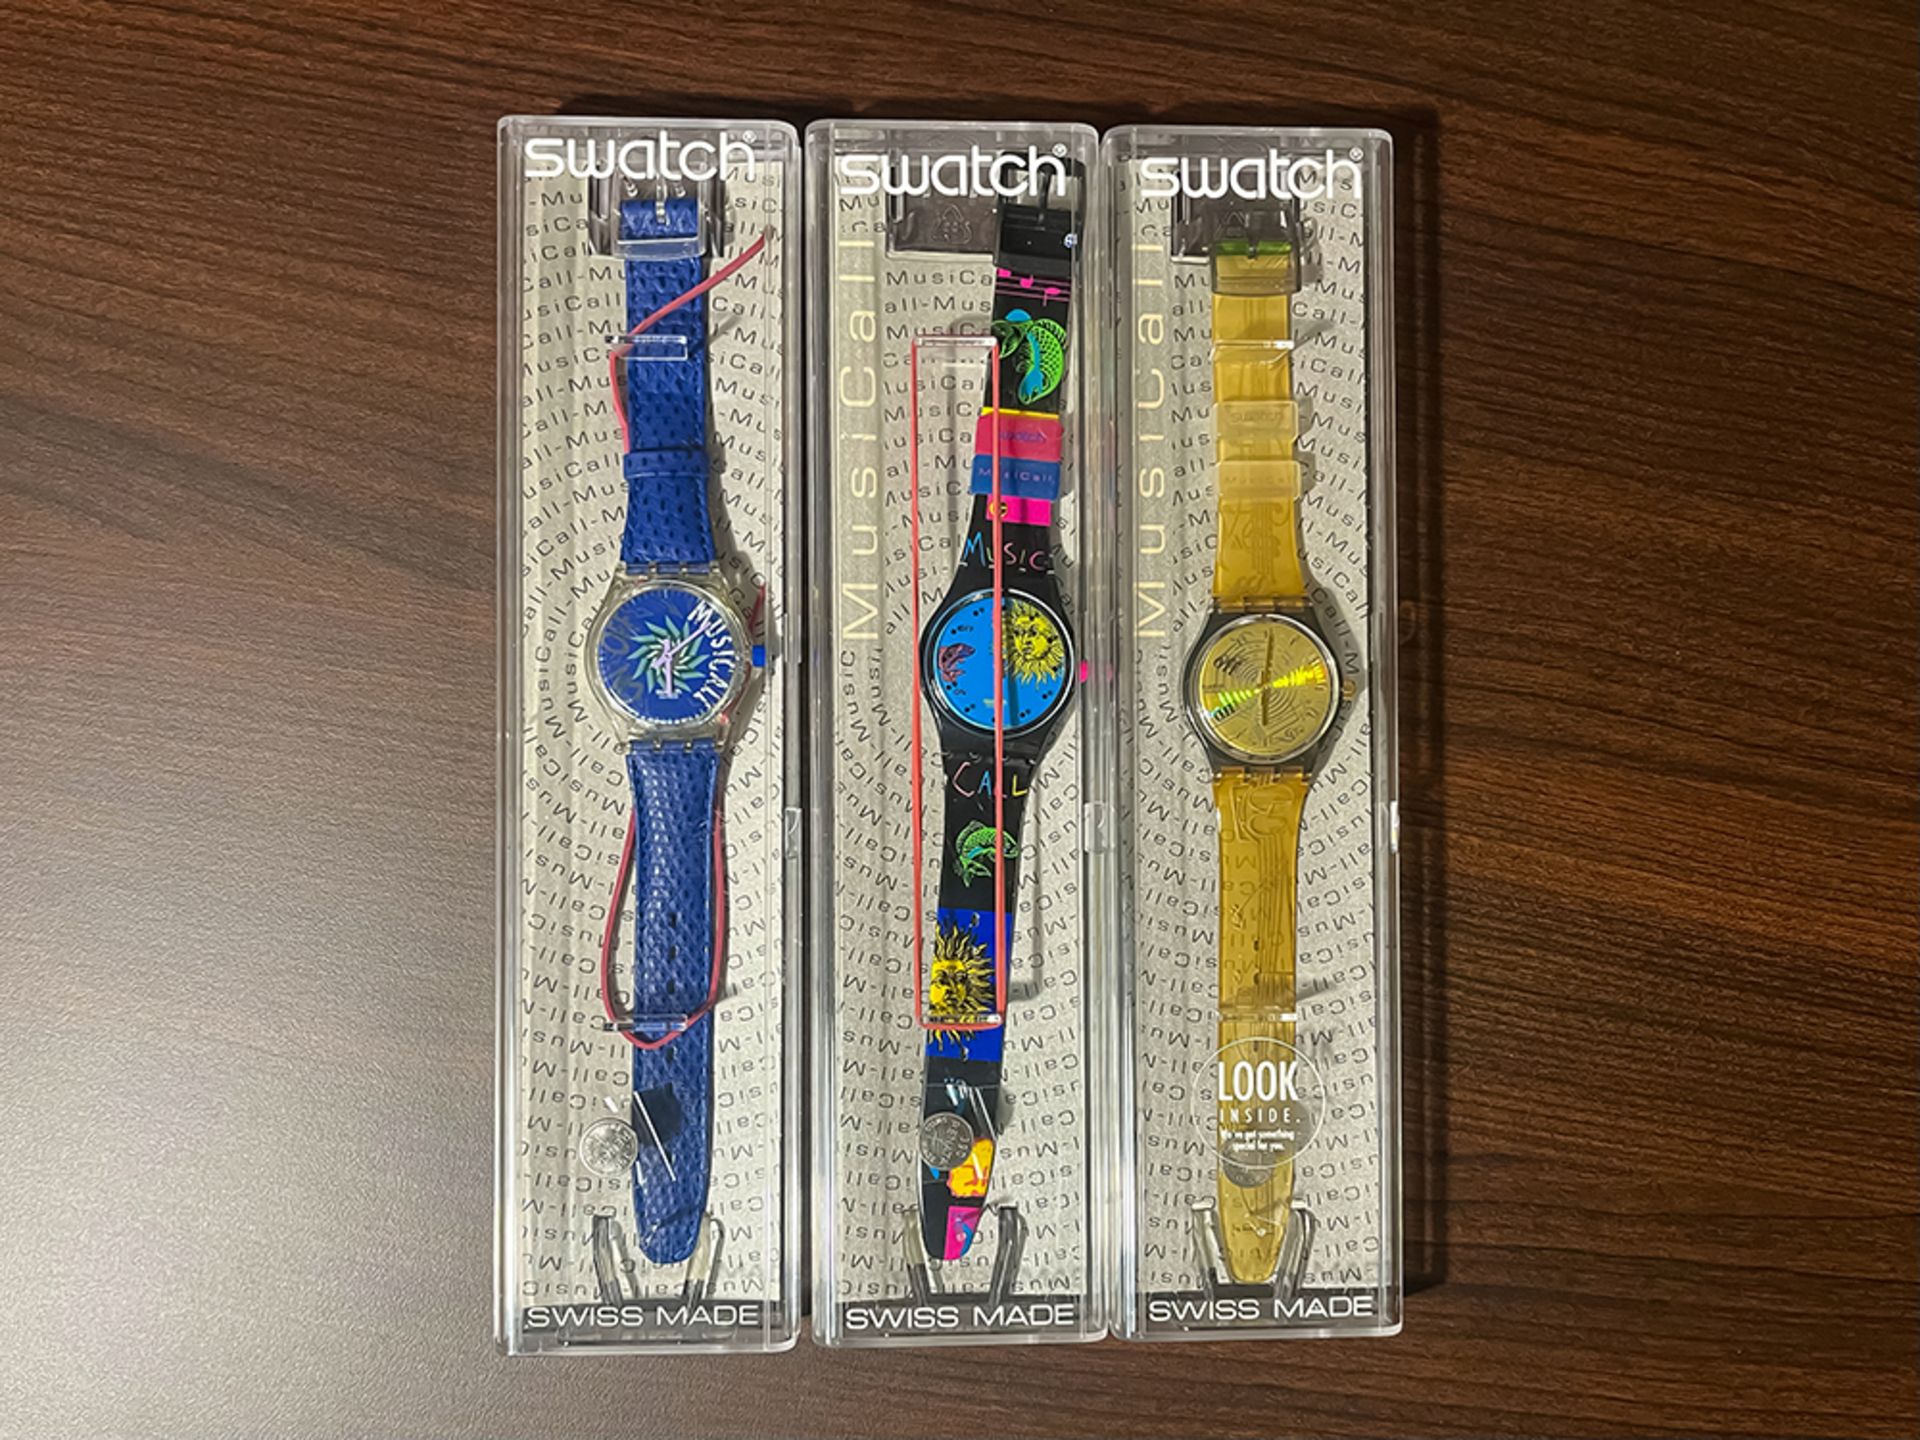 Collection of 105 pieces Swatch watches in original boxes - Image 16 of 19